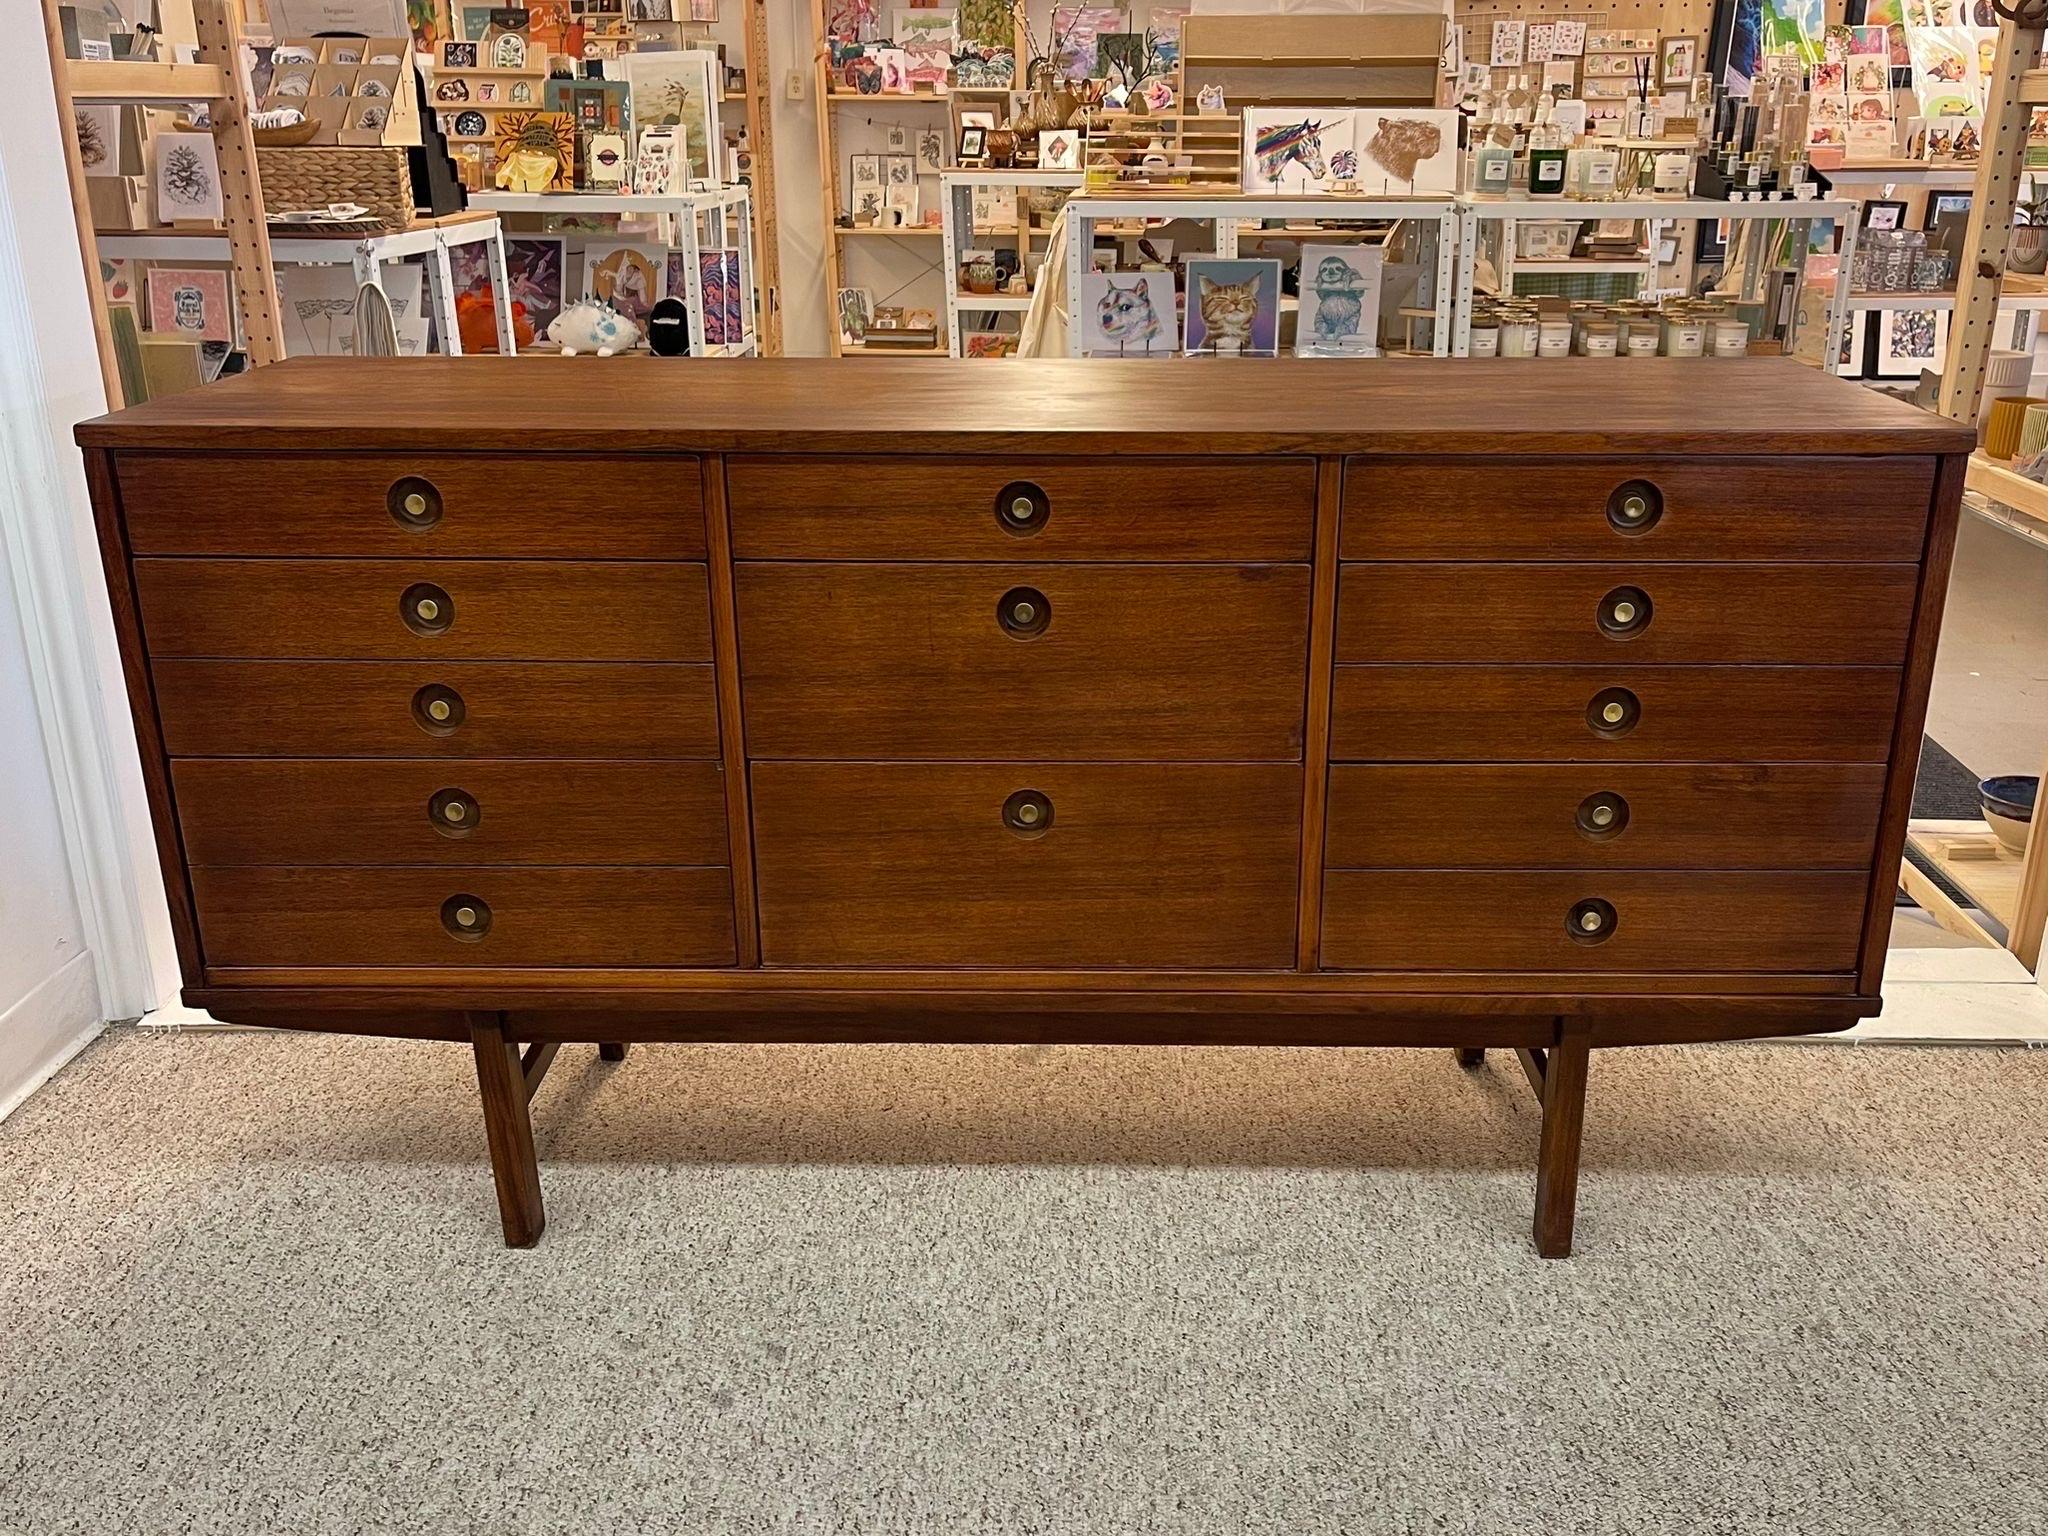 Walnut Toned 9 drawer dresser with dovetailed drawers, recessed handles with original brass toned hardware. Vintage condition consistent with age as Pictured.

Dimensions. 62 W ; 18 1/2 D ; 32 H